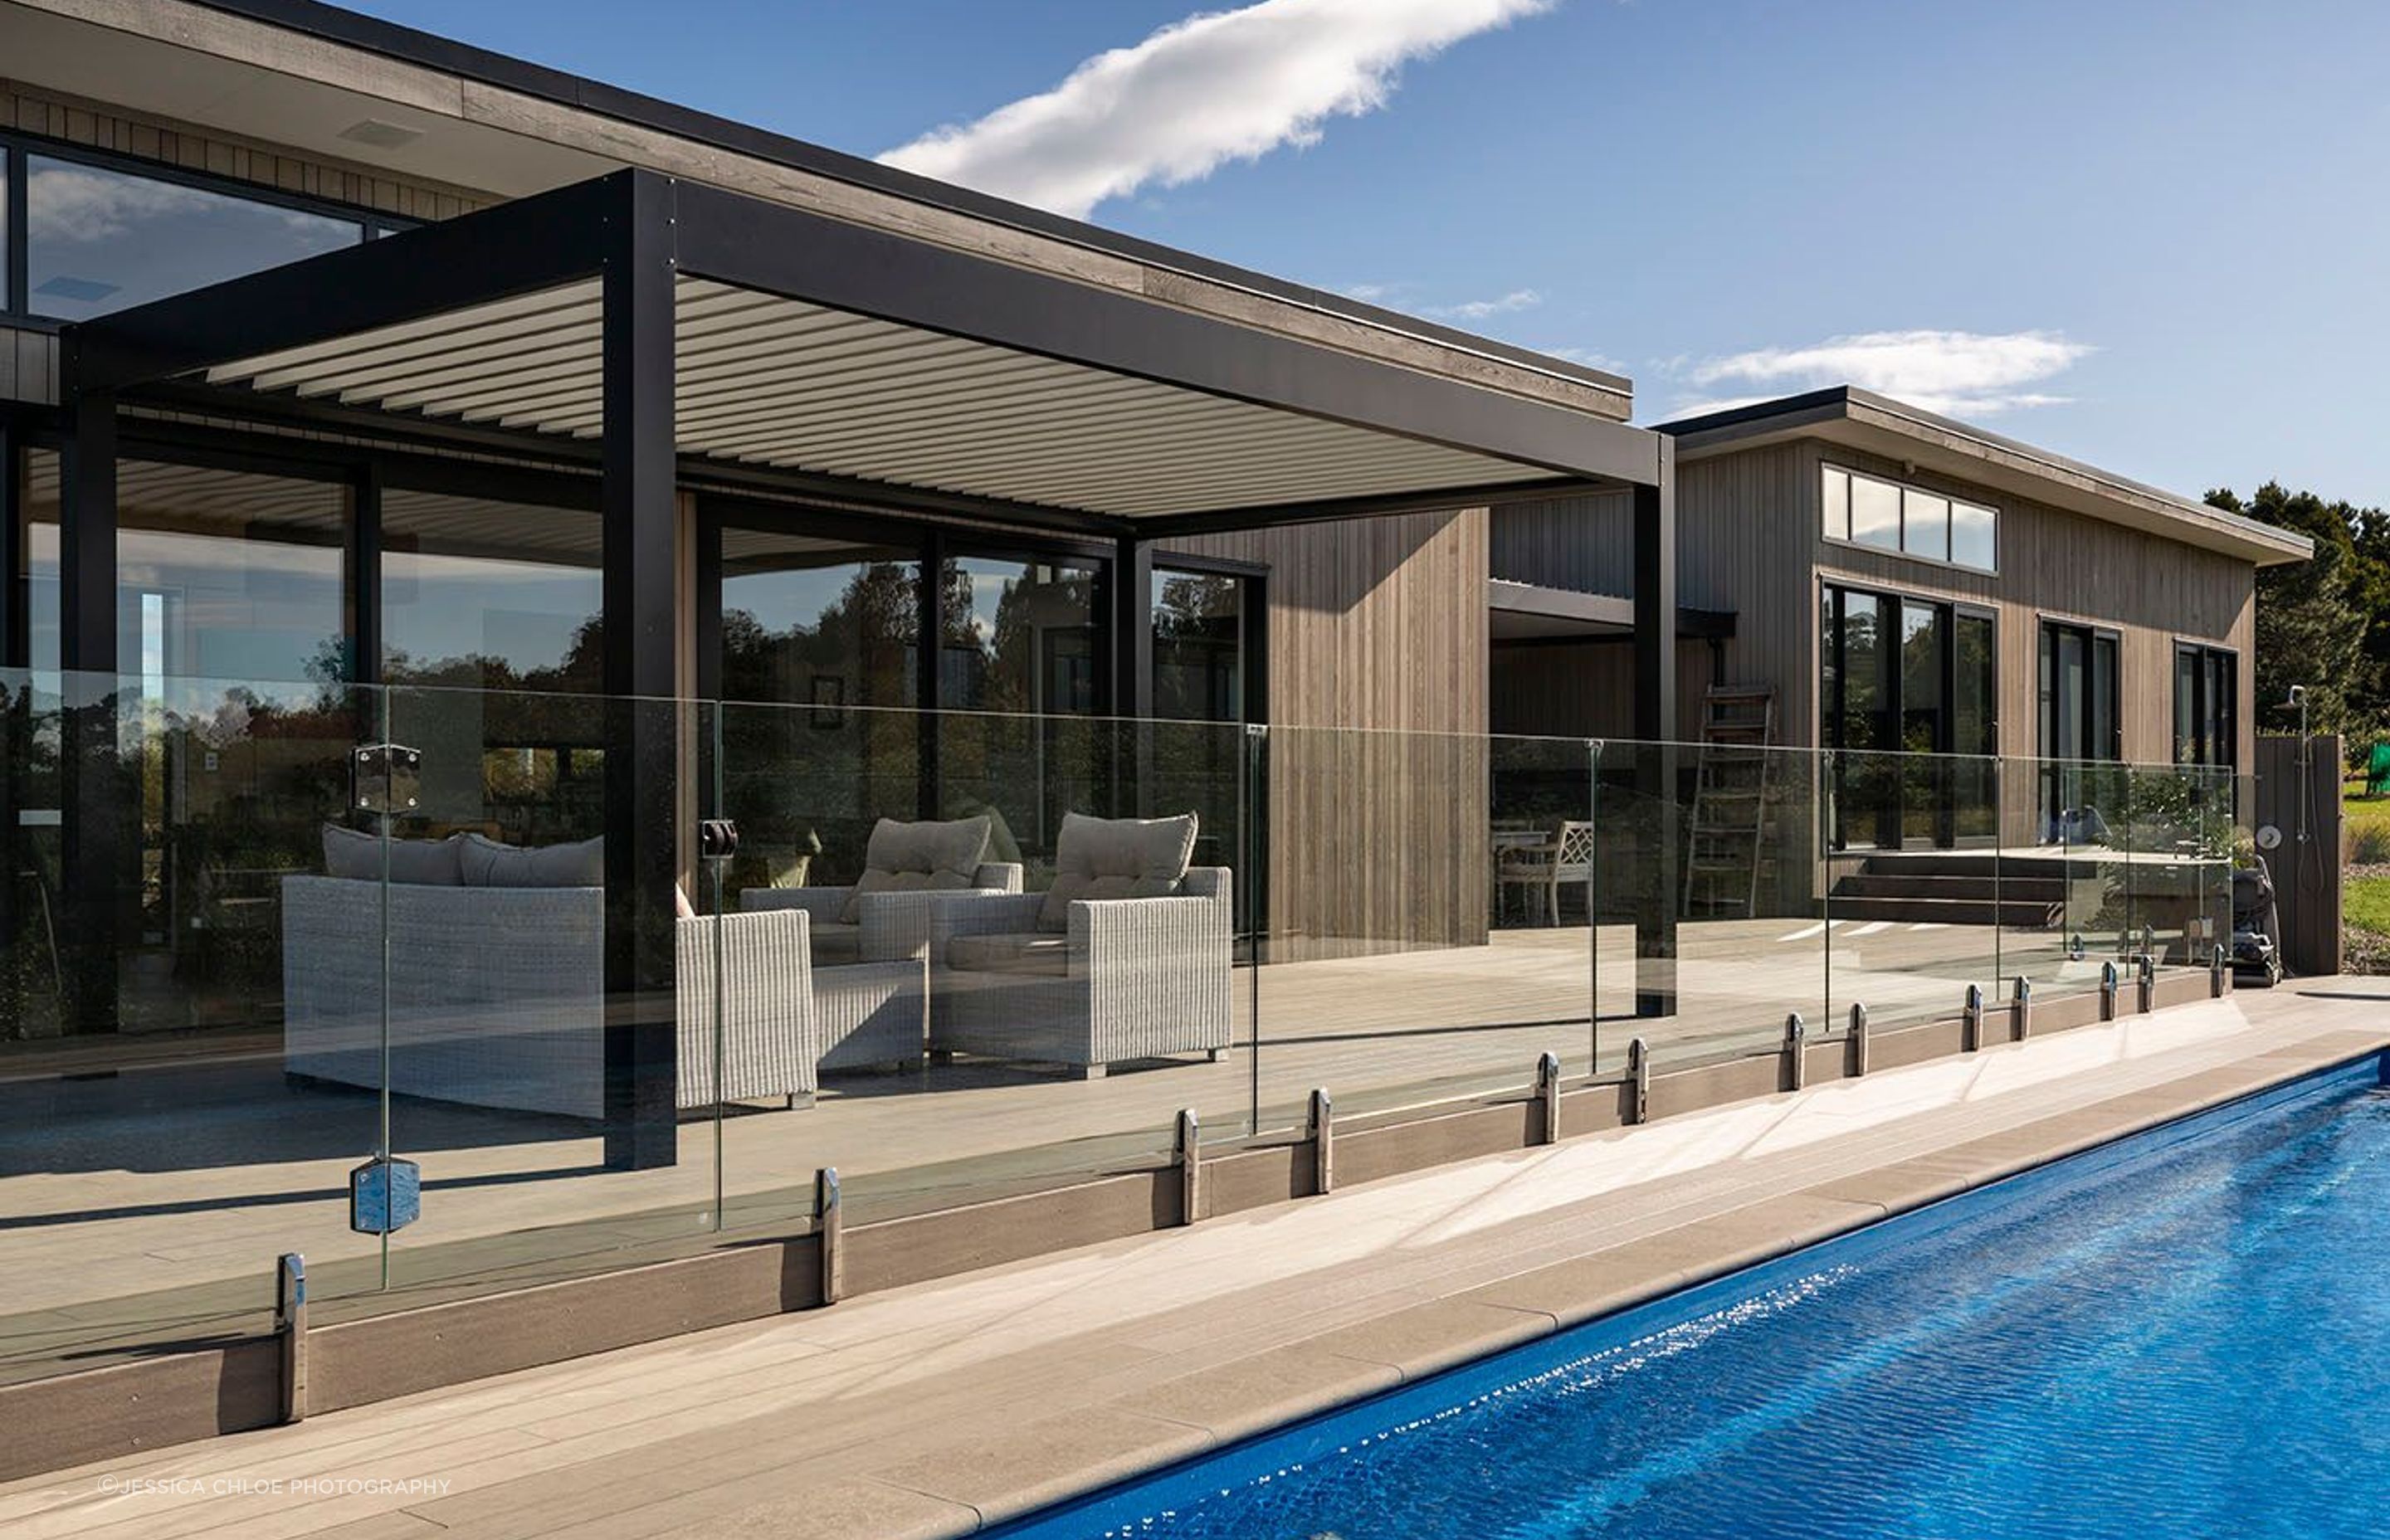 Generous decks lead out to the pool.